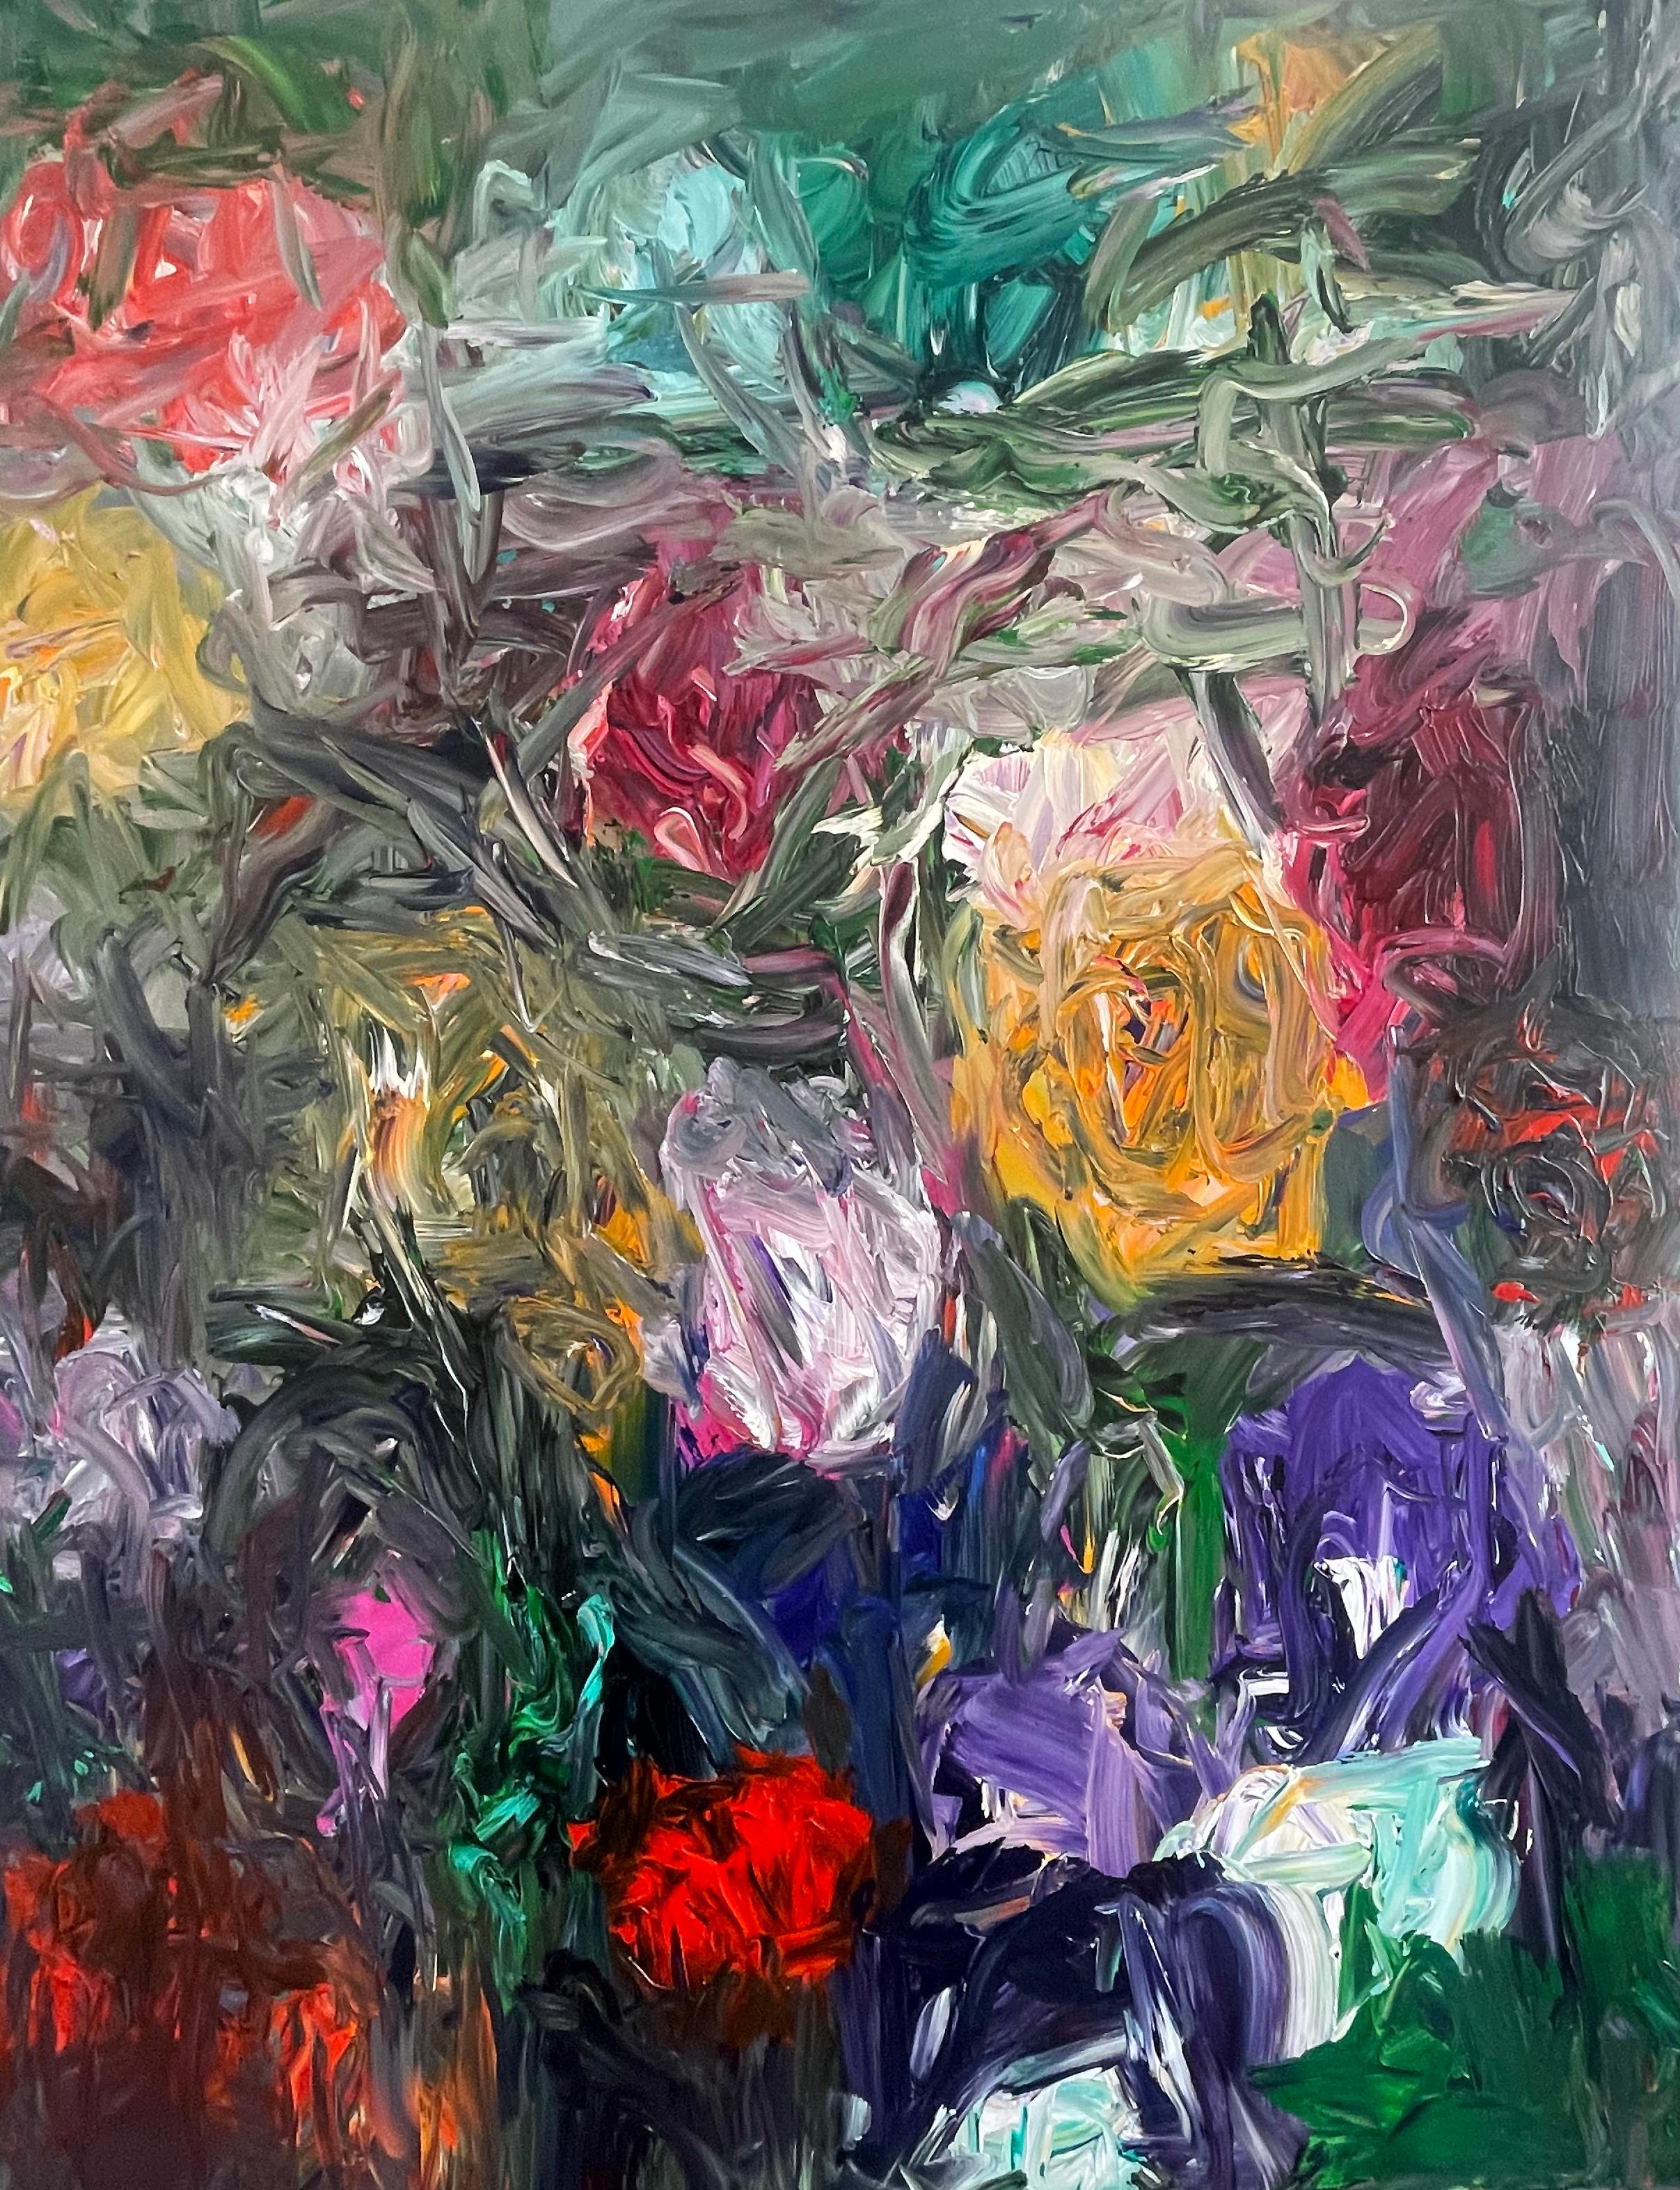 Collection: Beyond the Horizon
Acrylic on canvas

Md Tokon's style has reflected the art of American Abstract Expressionists. Md Tokon spent his early years in Jhenidah and Dhaka. The physicality and immediacy of his paintings are inspired moments